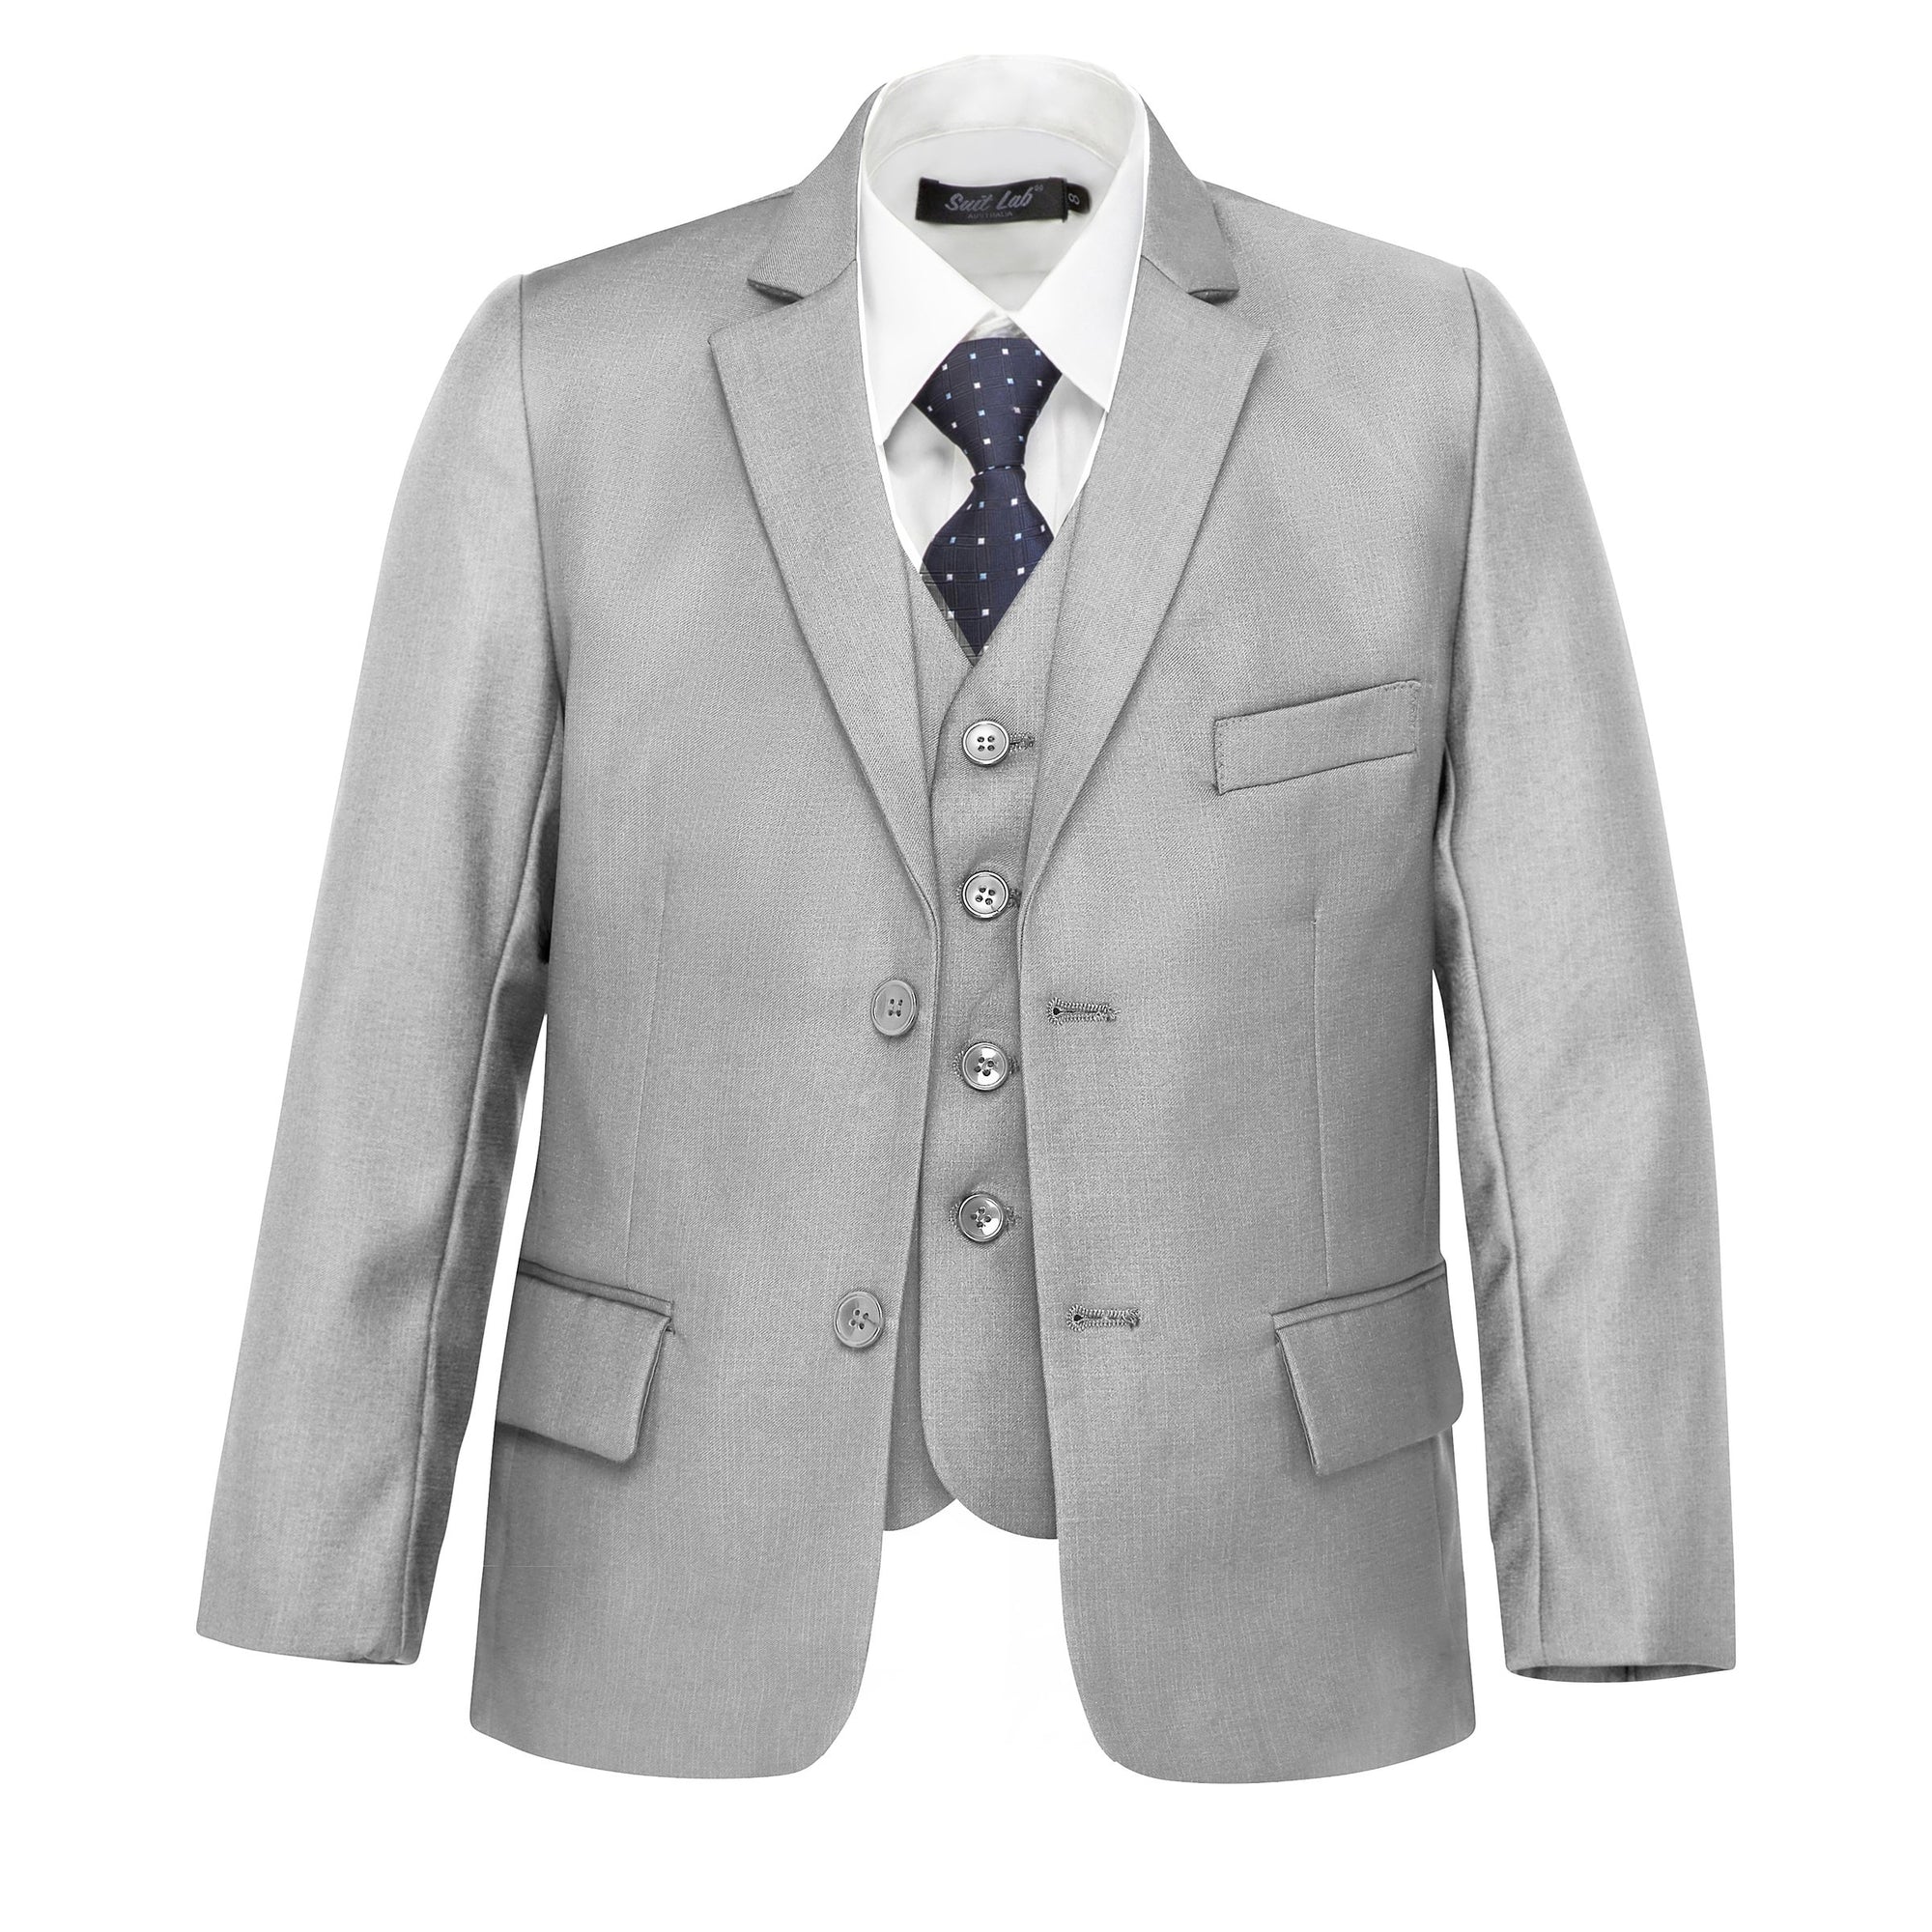 Boys Light Grey Suits, Page Boy Suits & Wedding Suits